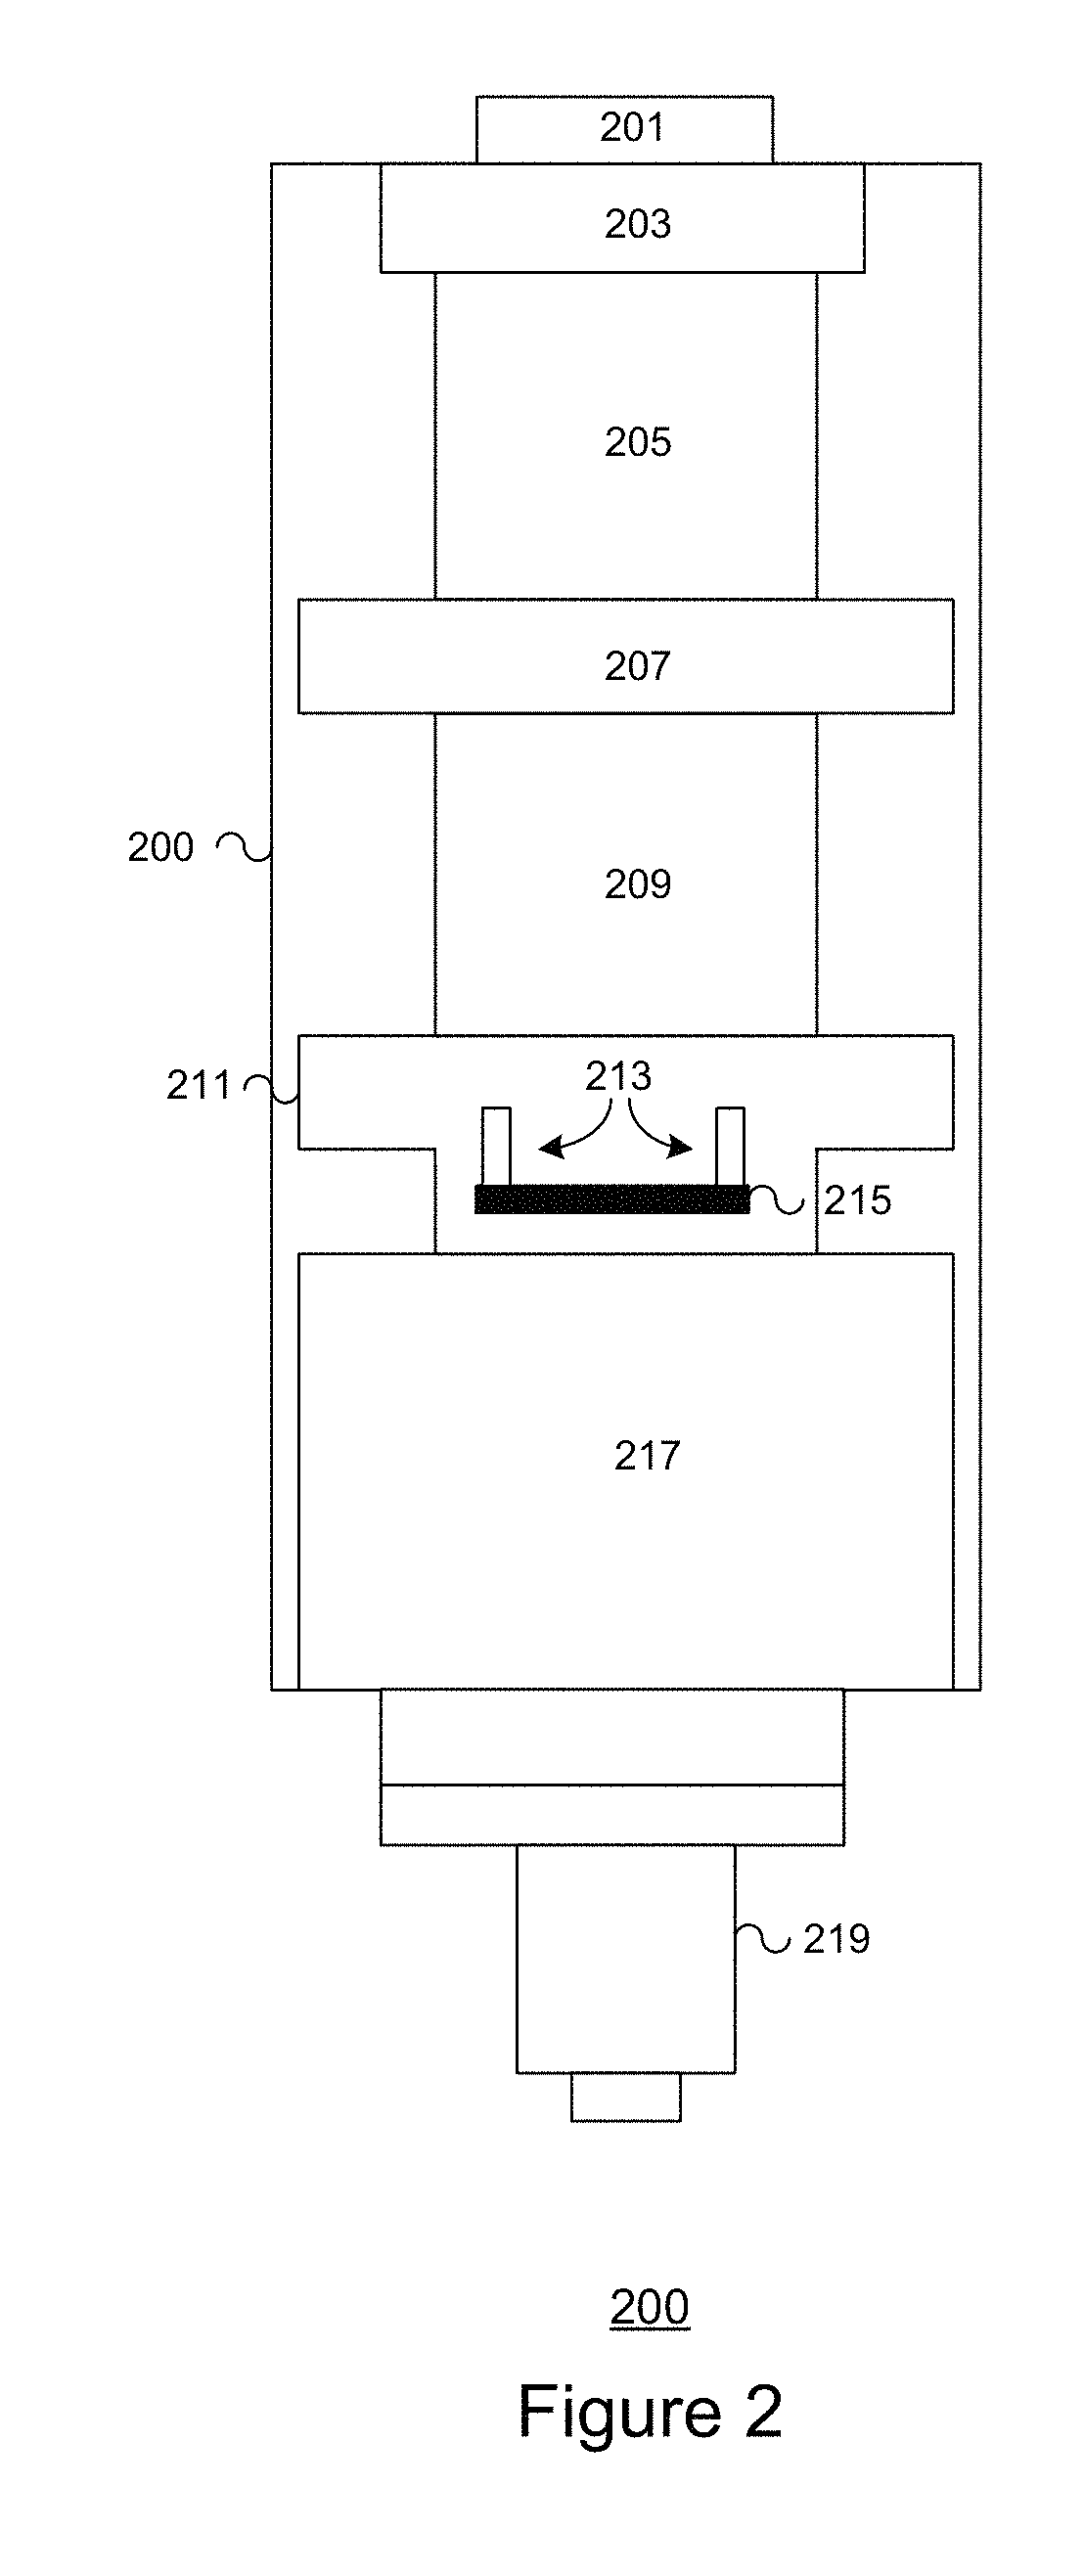 Beam limiting device for intensity modulated proton therapy